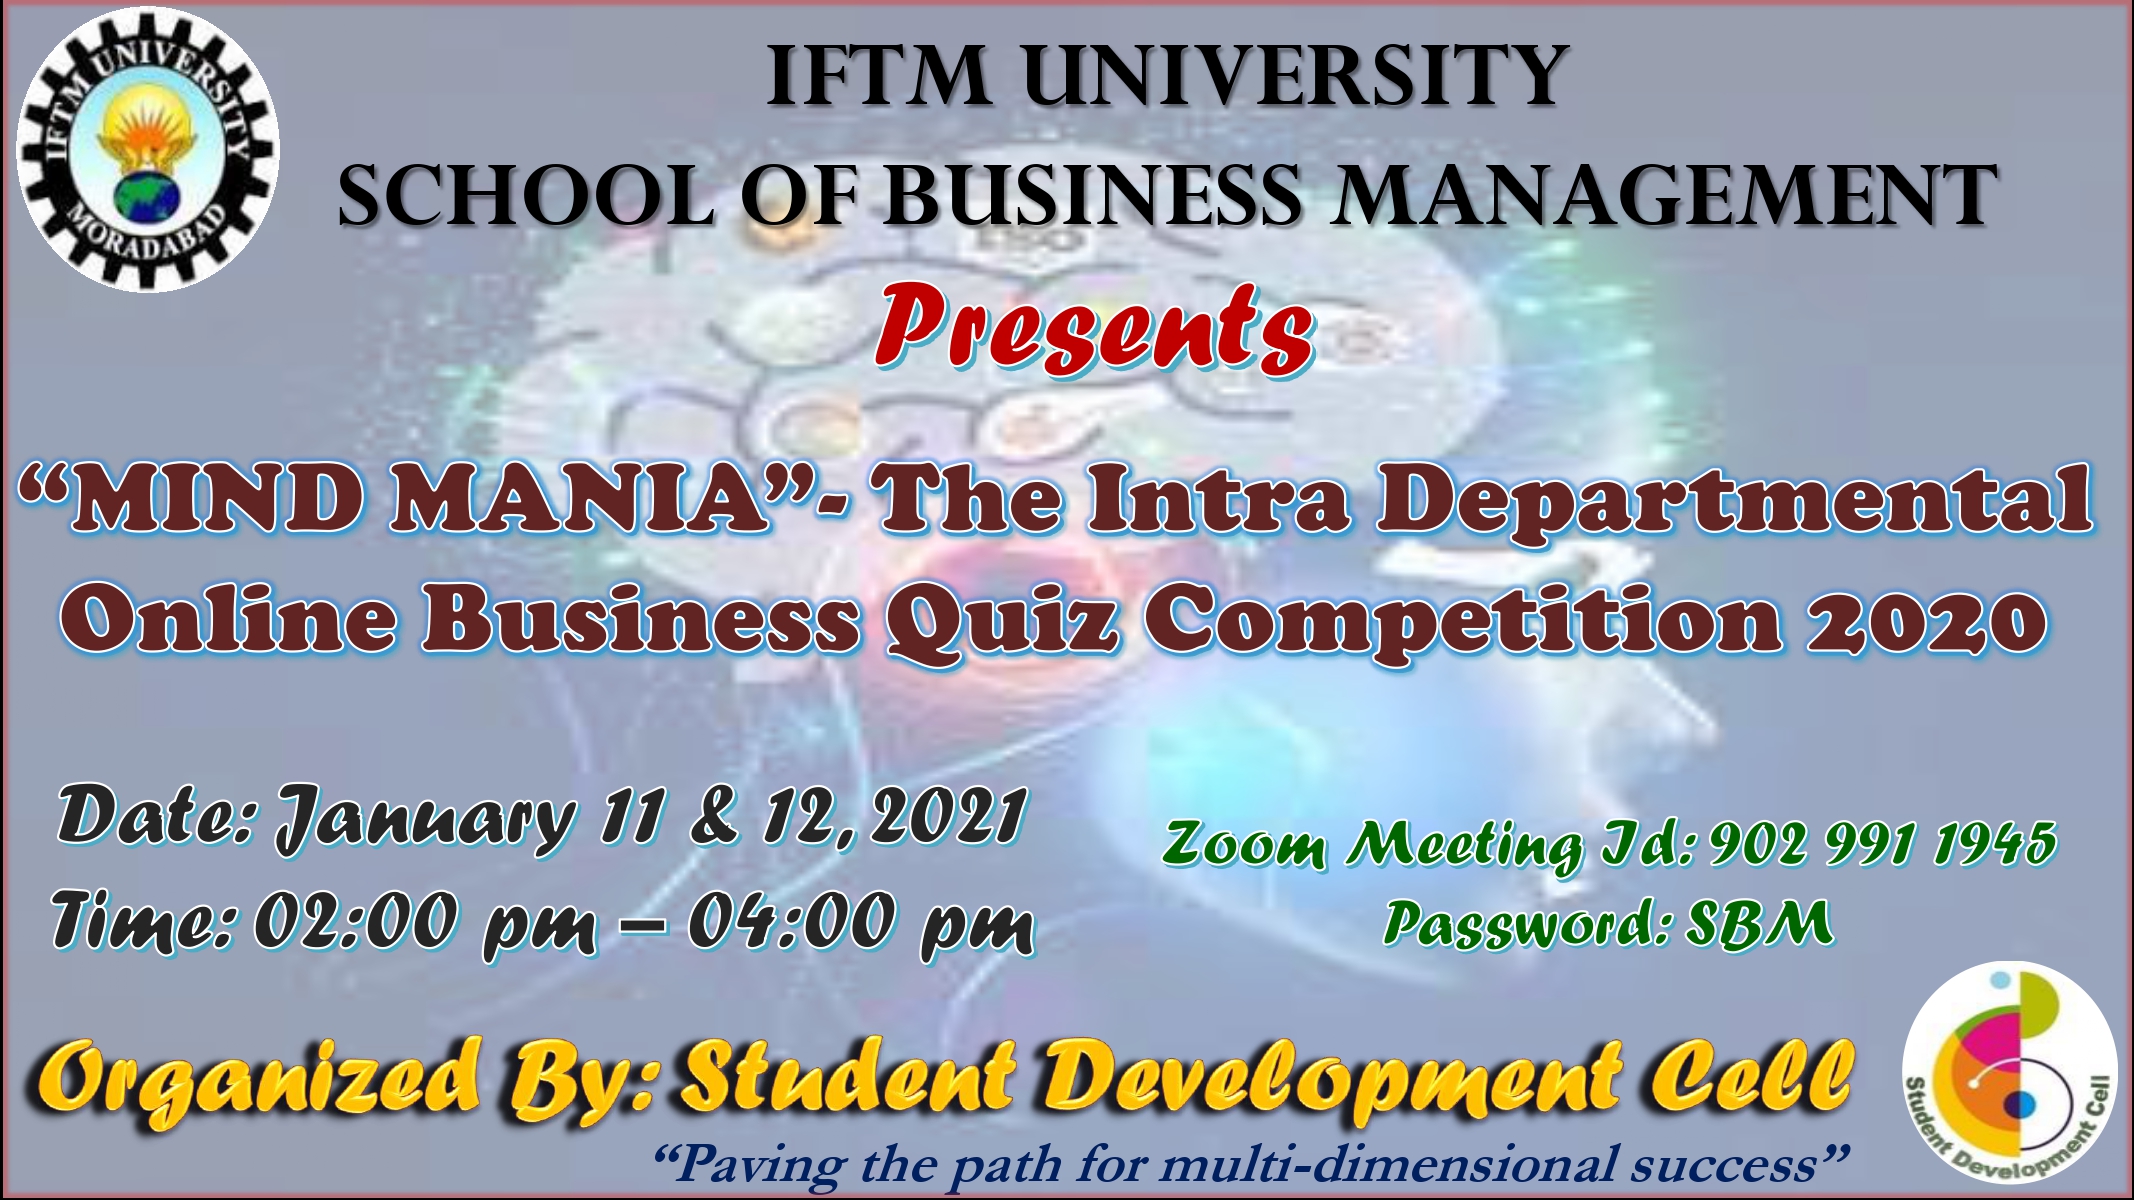 "MIND MANIA" - The Intra Departmental Online Business Quiz Competition 2020